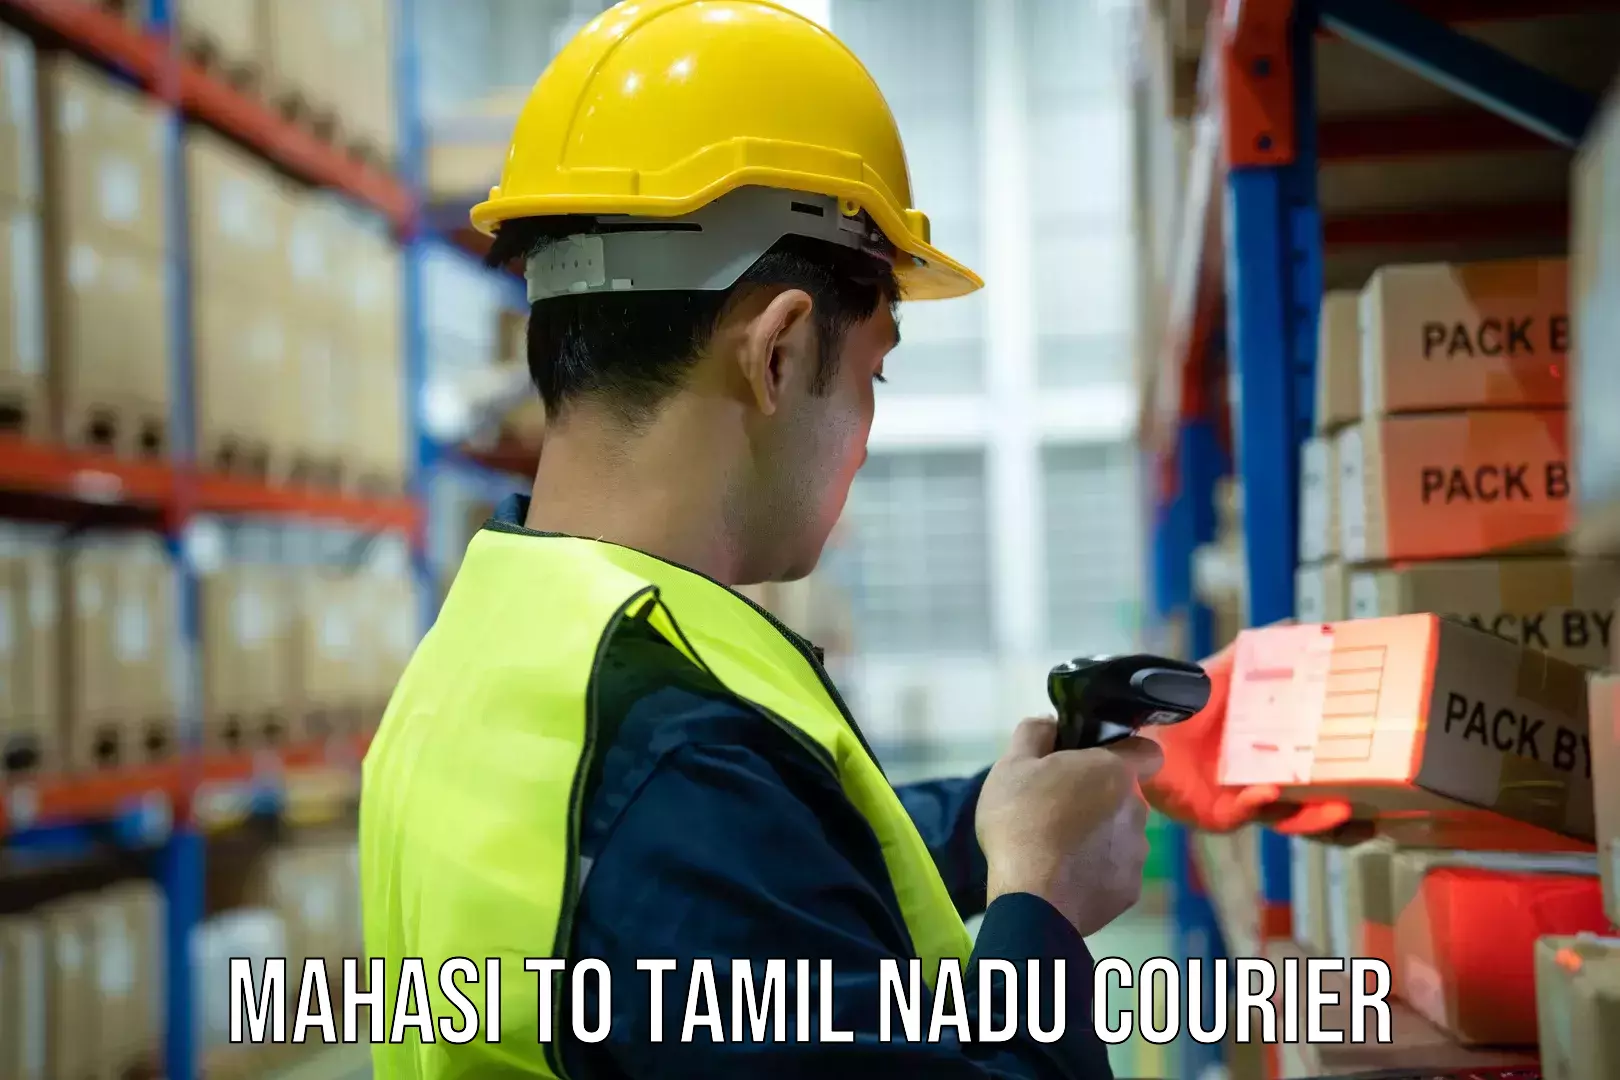 Express delivery solutions Mahasi to Tamil Nadu